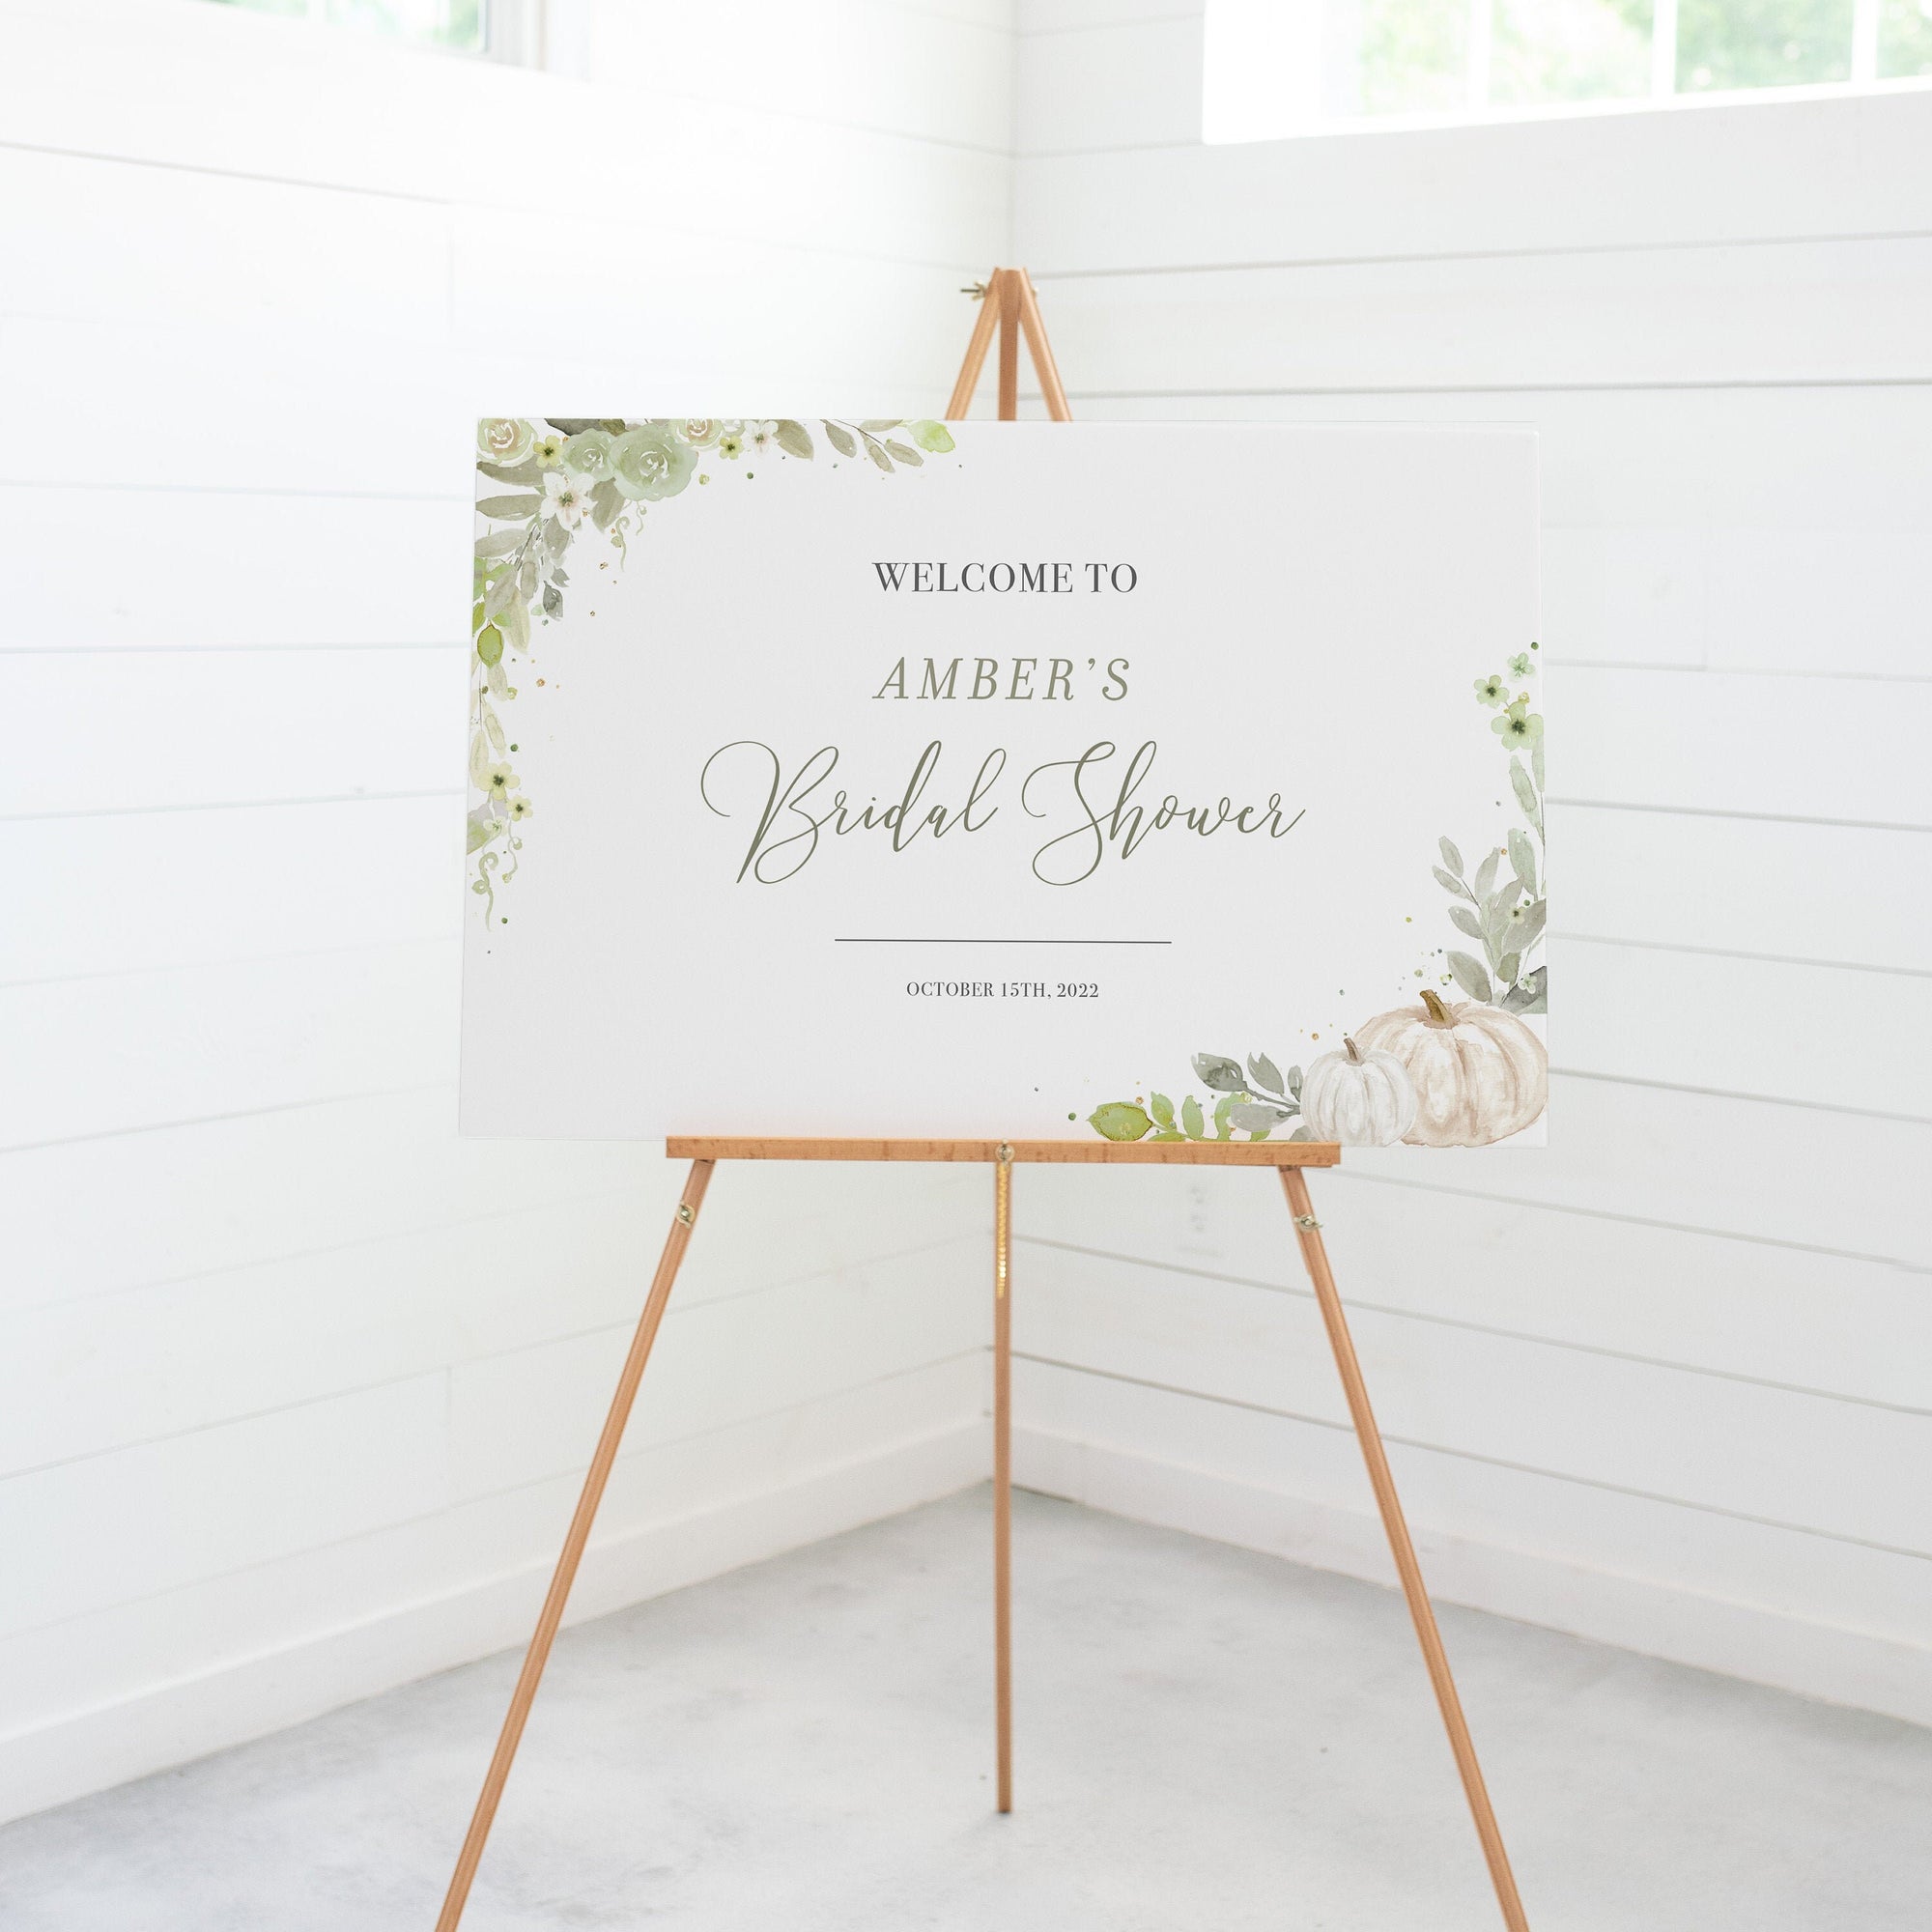 Fall Bridal Shower Welcome Sign Template, Greenery Fall Bridal Shower Decorations, Bridal Shower Sign Printable, DIGITAL DOWNLOAD - PG100